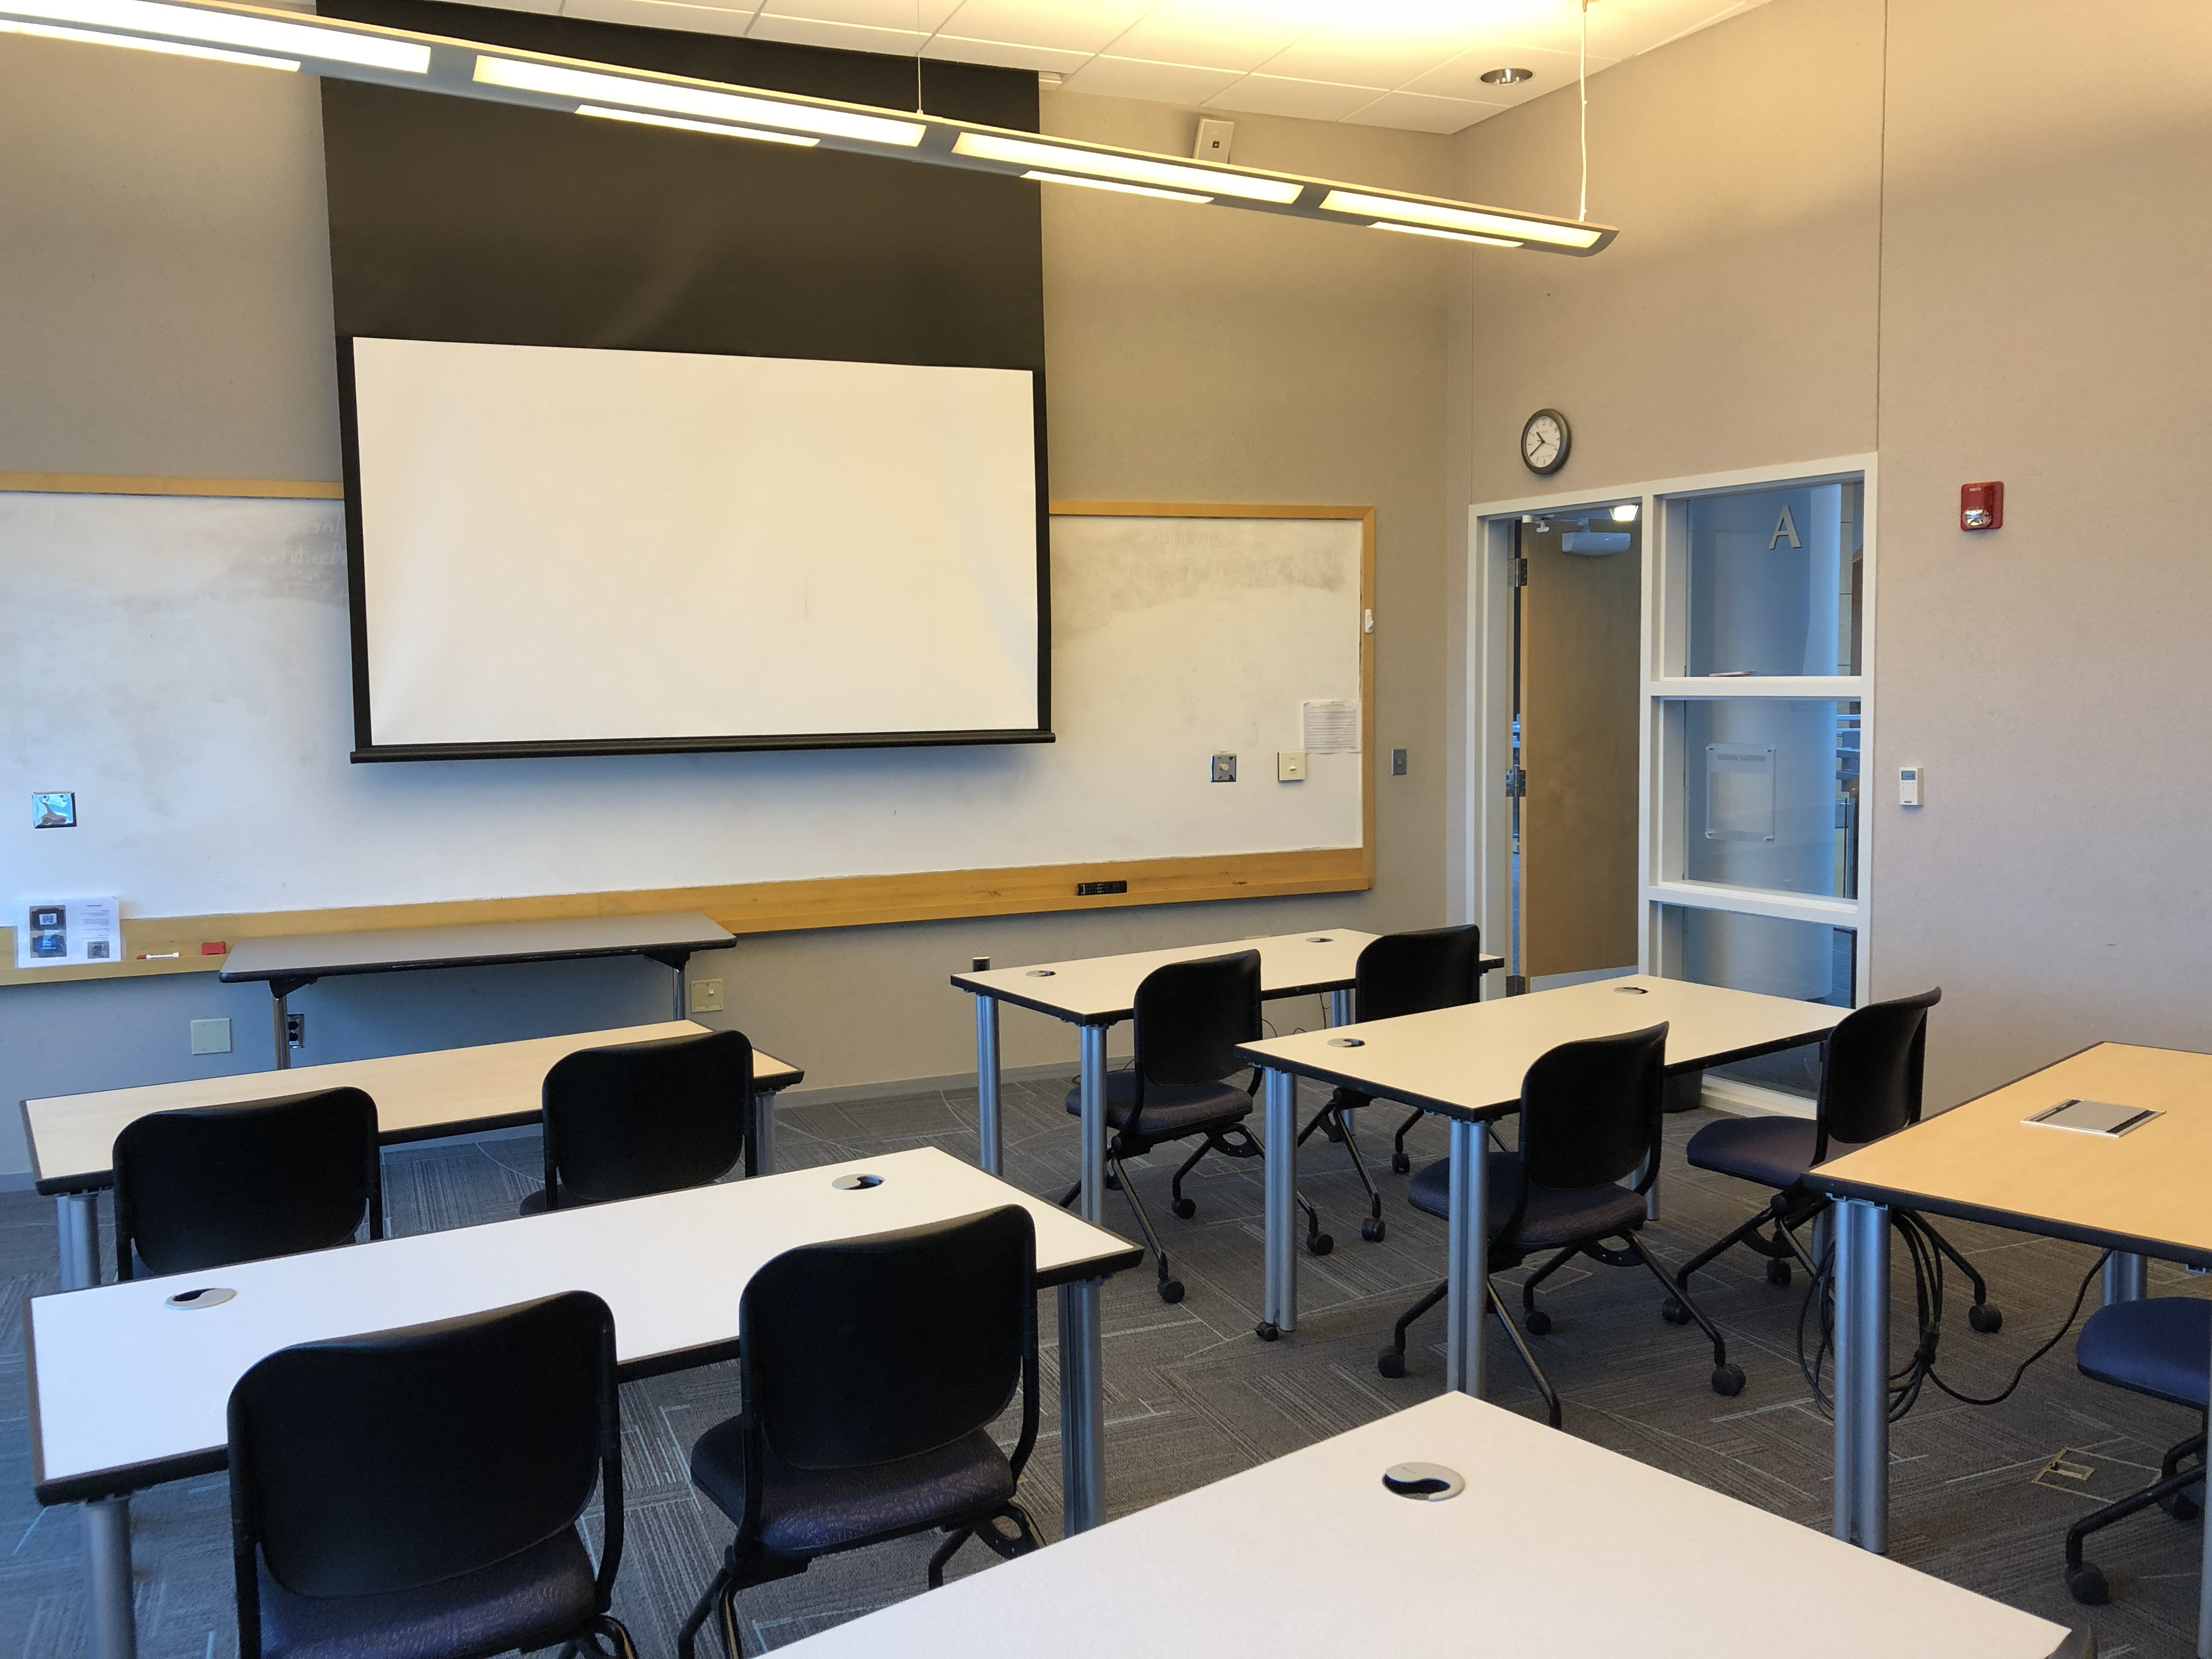 Classroom D with classroom-style seating and large screen at front of room